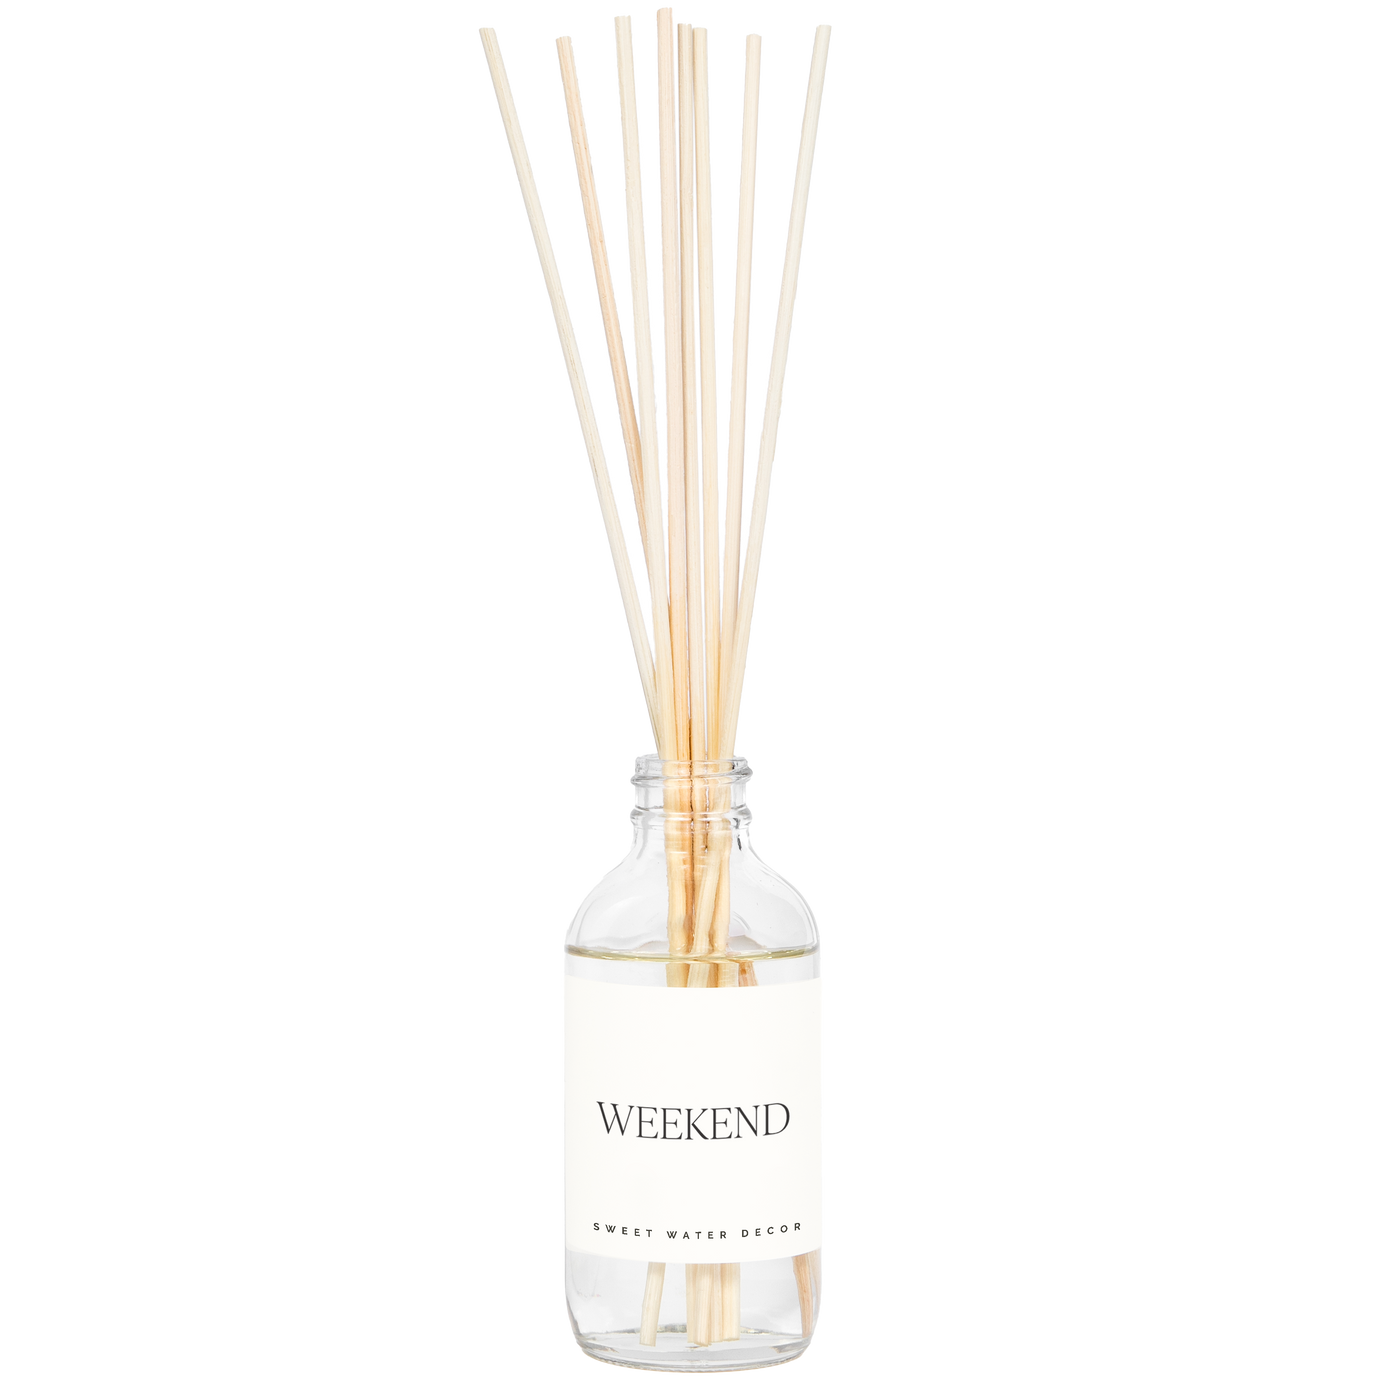 Sweet Water Decor Weekend Reed Diffuser - Gifts & Home Decor - Simple Good